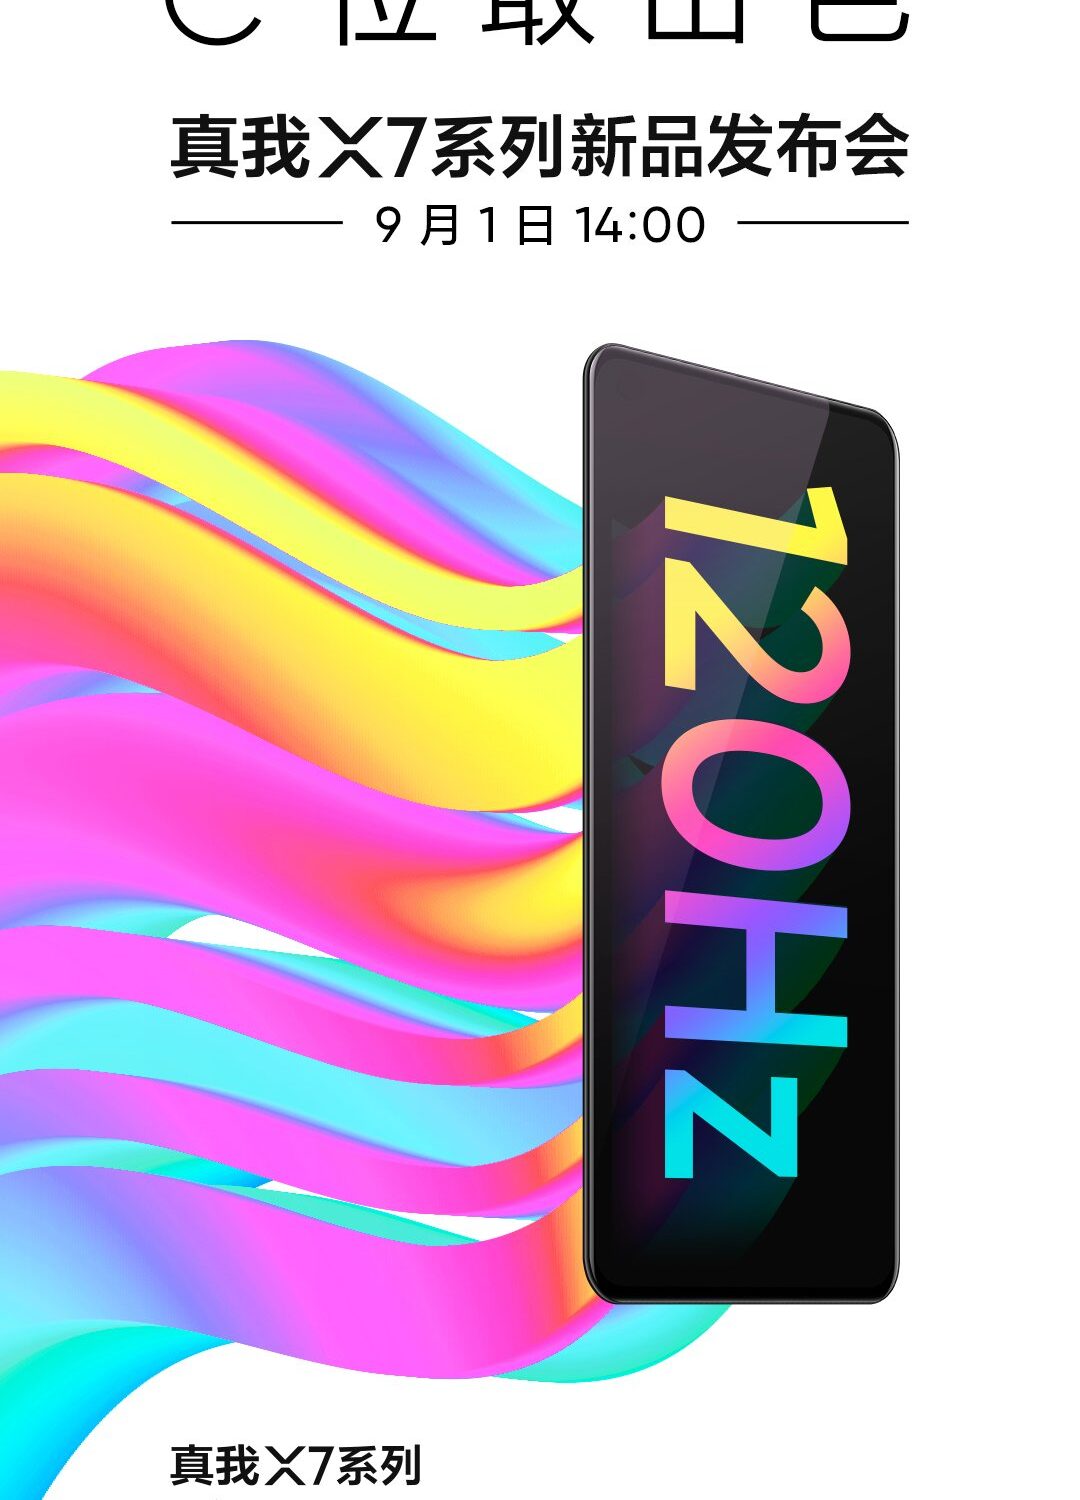 Realme X7 series with 120Hz AMOLED display, Quad Camera, 65W SuperDart Charging launching on September 1st in China